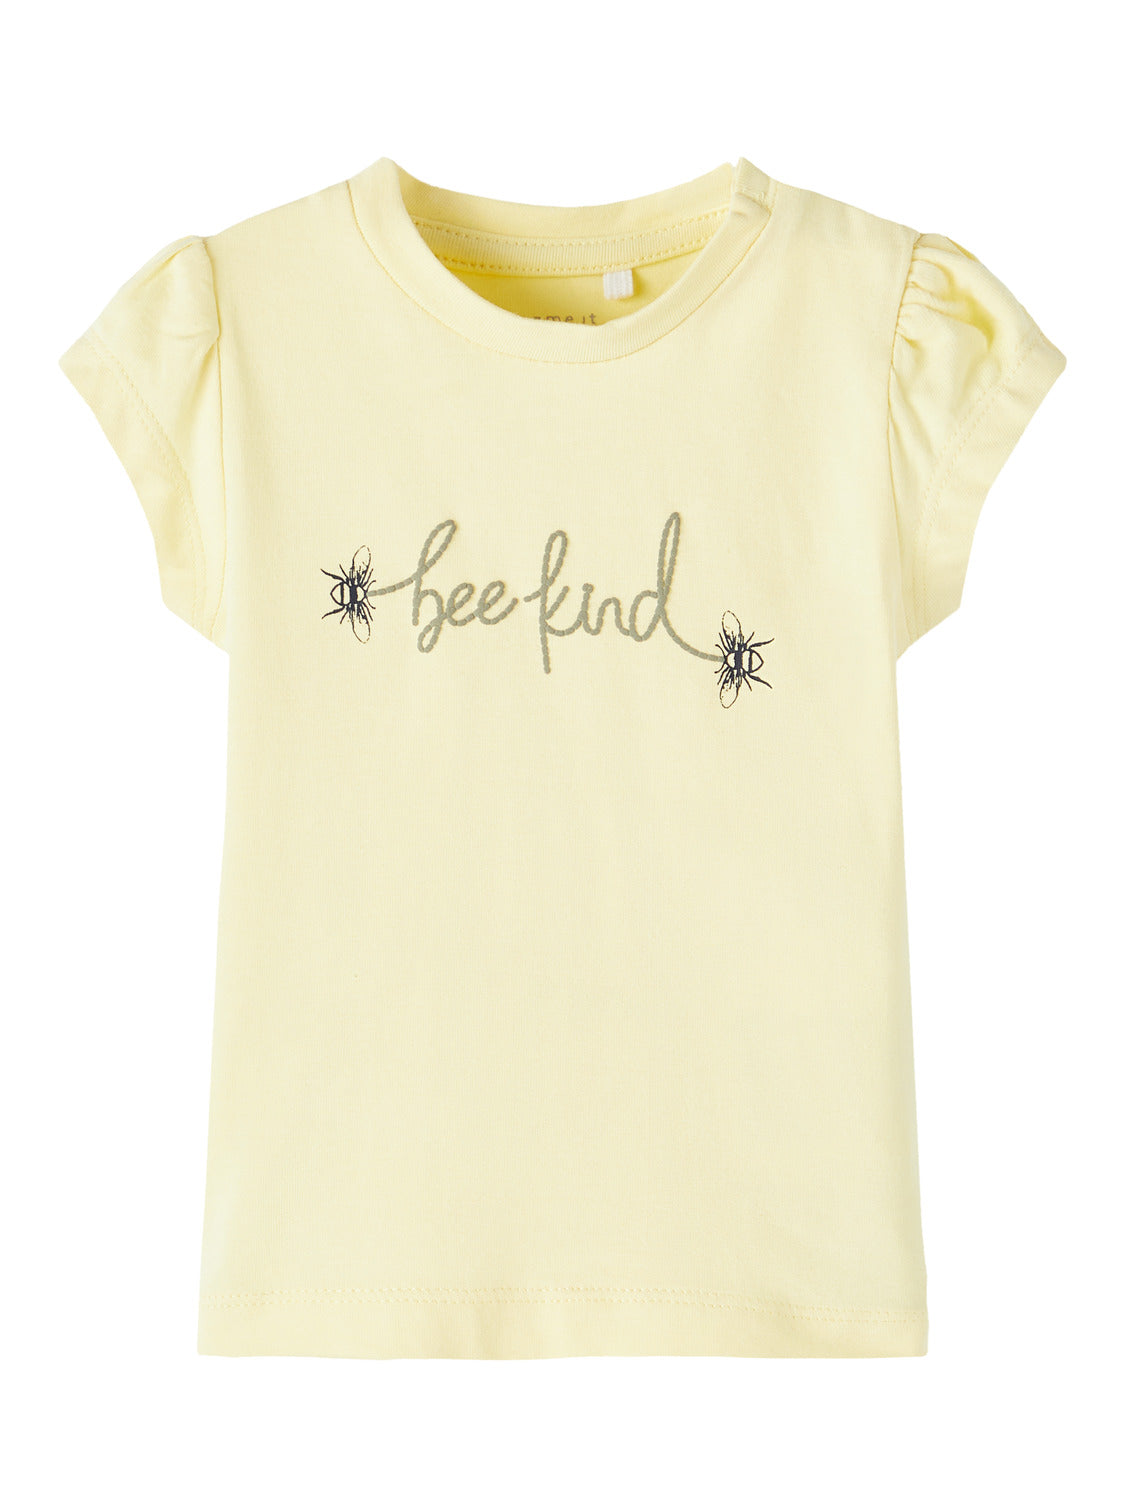 NBFHORAH T-Shirts & Tops - Double Cream